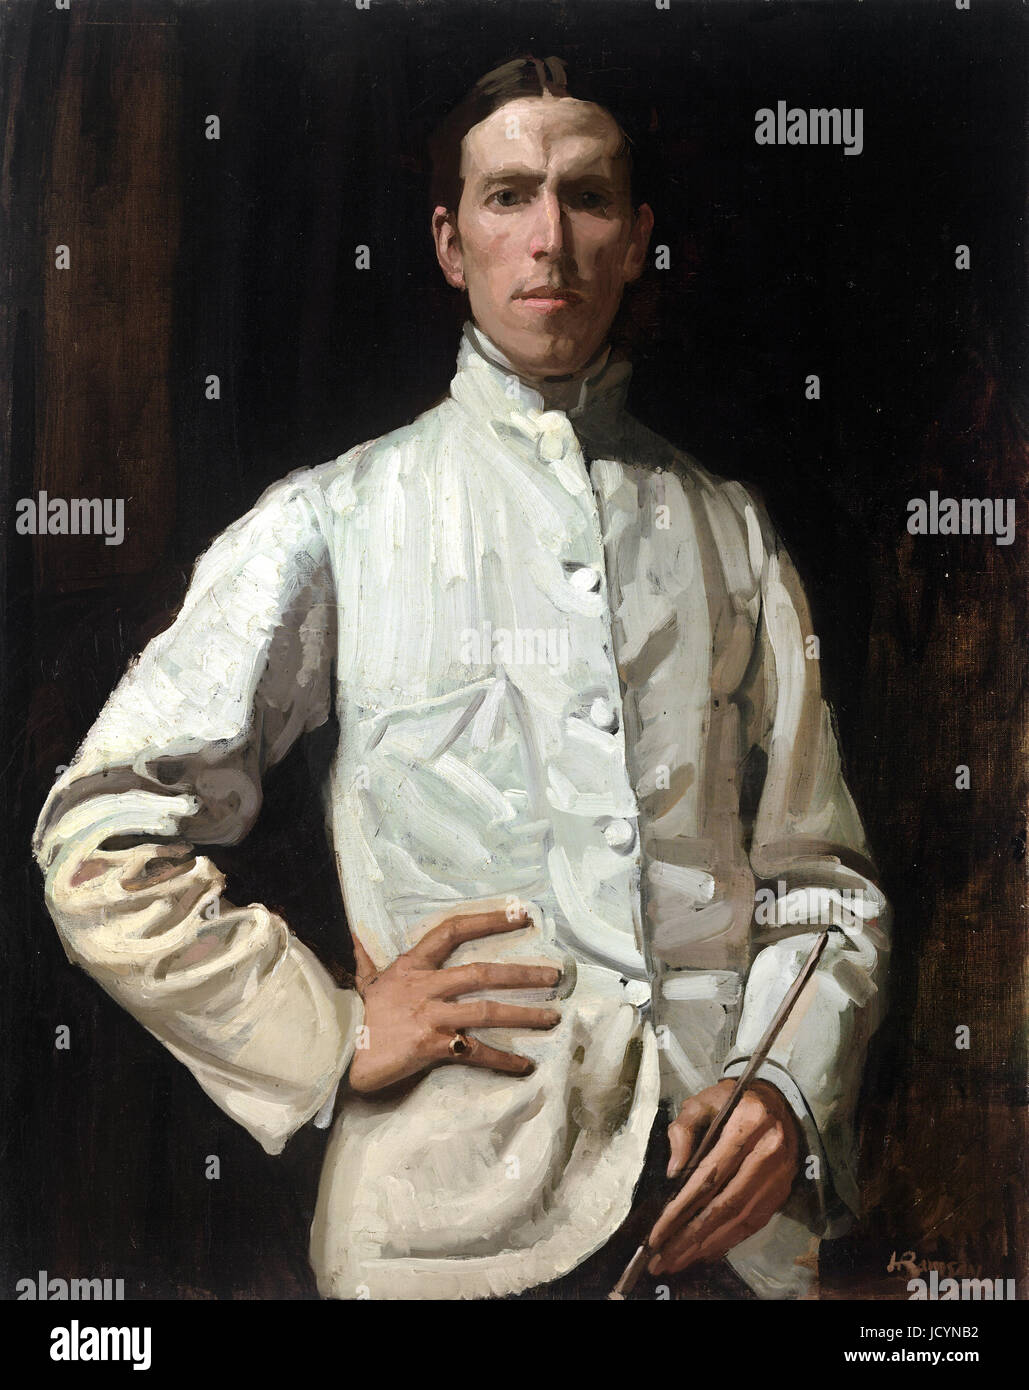 Hugh Ramsay, Self-portrait in White Jacket 1901-1902 Oil on canvas. National Gallery of Victoria, Australia. Stock Photo